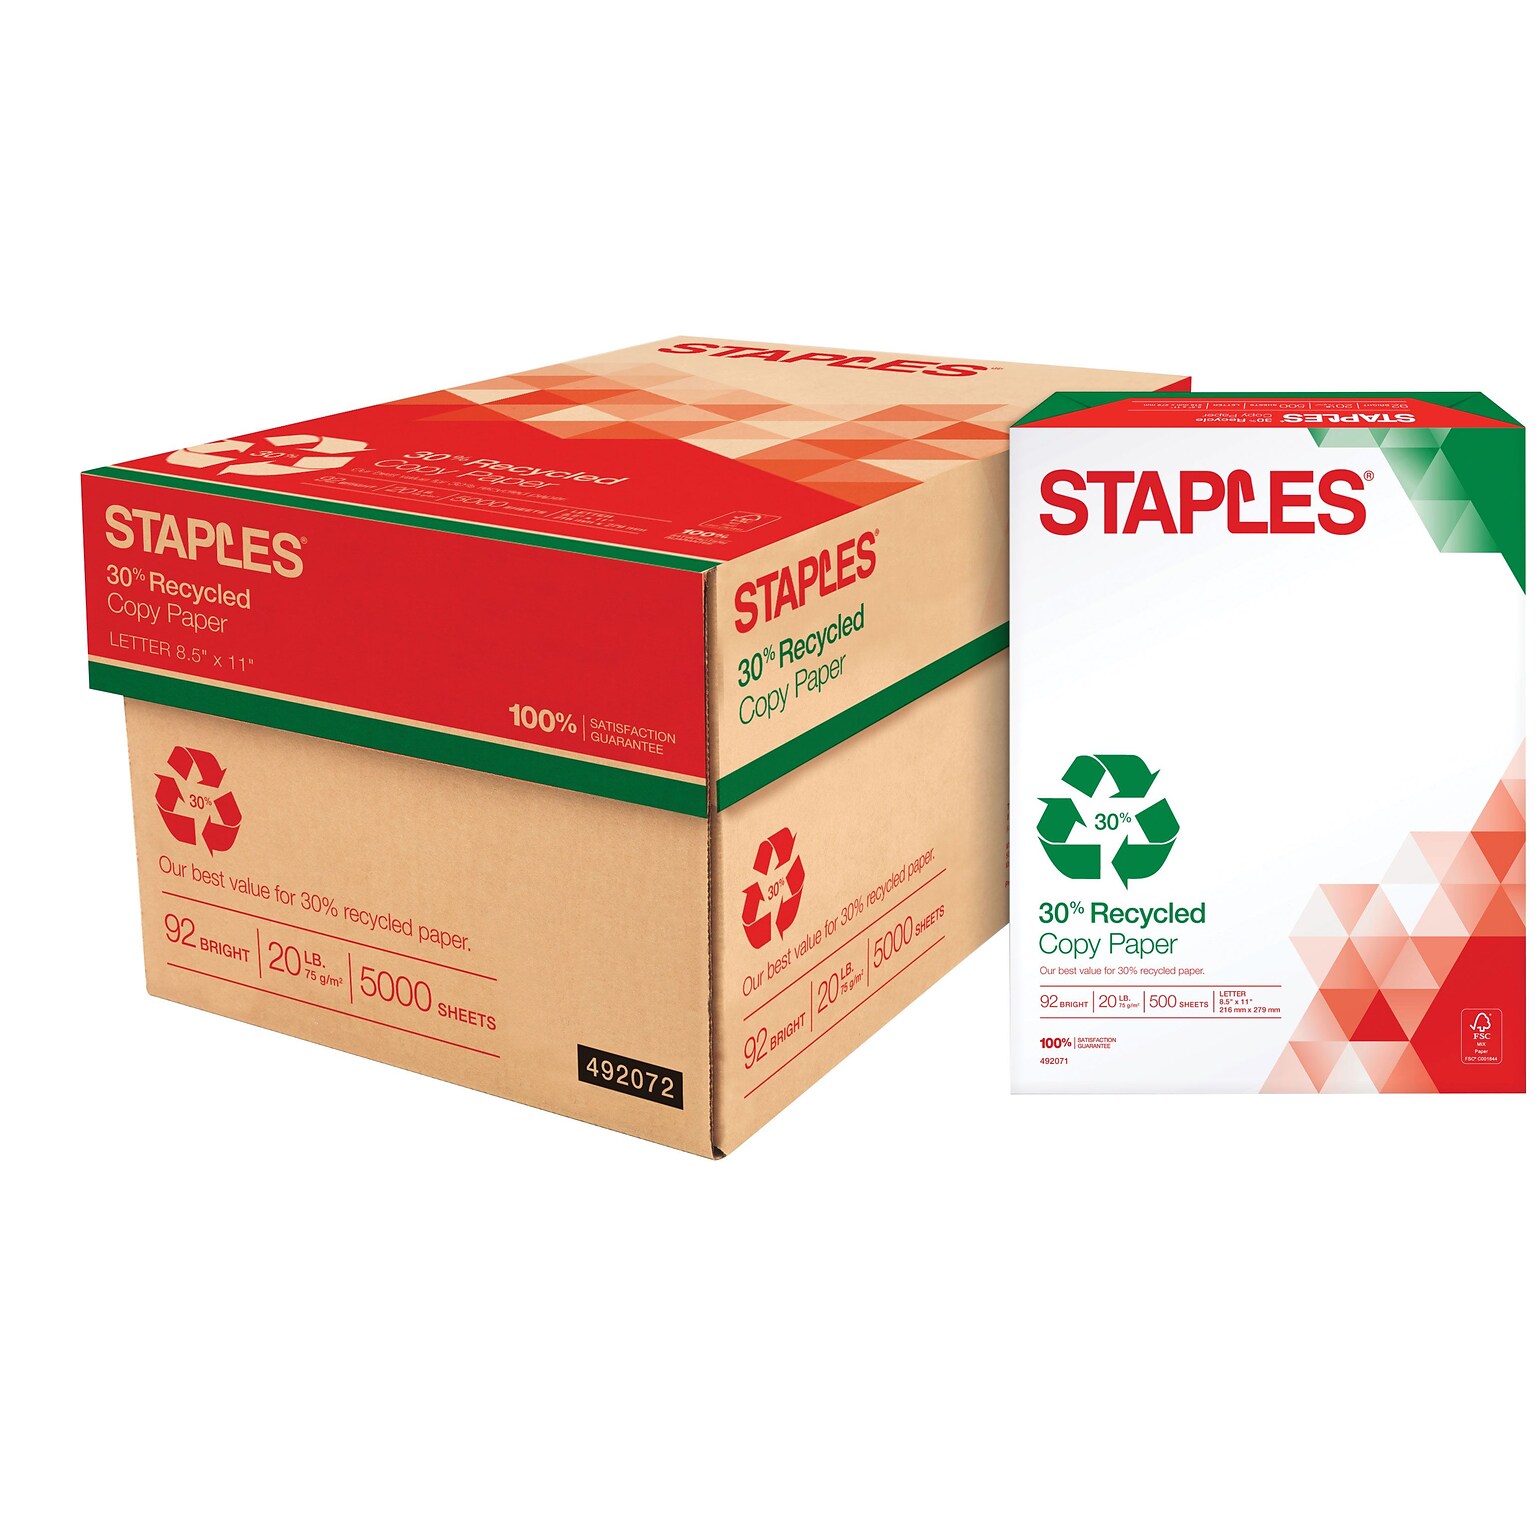 Staples 30% Recycled 8.5 x 11 (US letter) Copy Paper, 20 lbs., 92 Brightness, 5000/Carton (112350/461757)